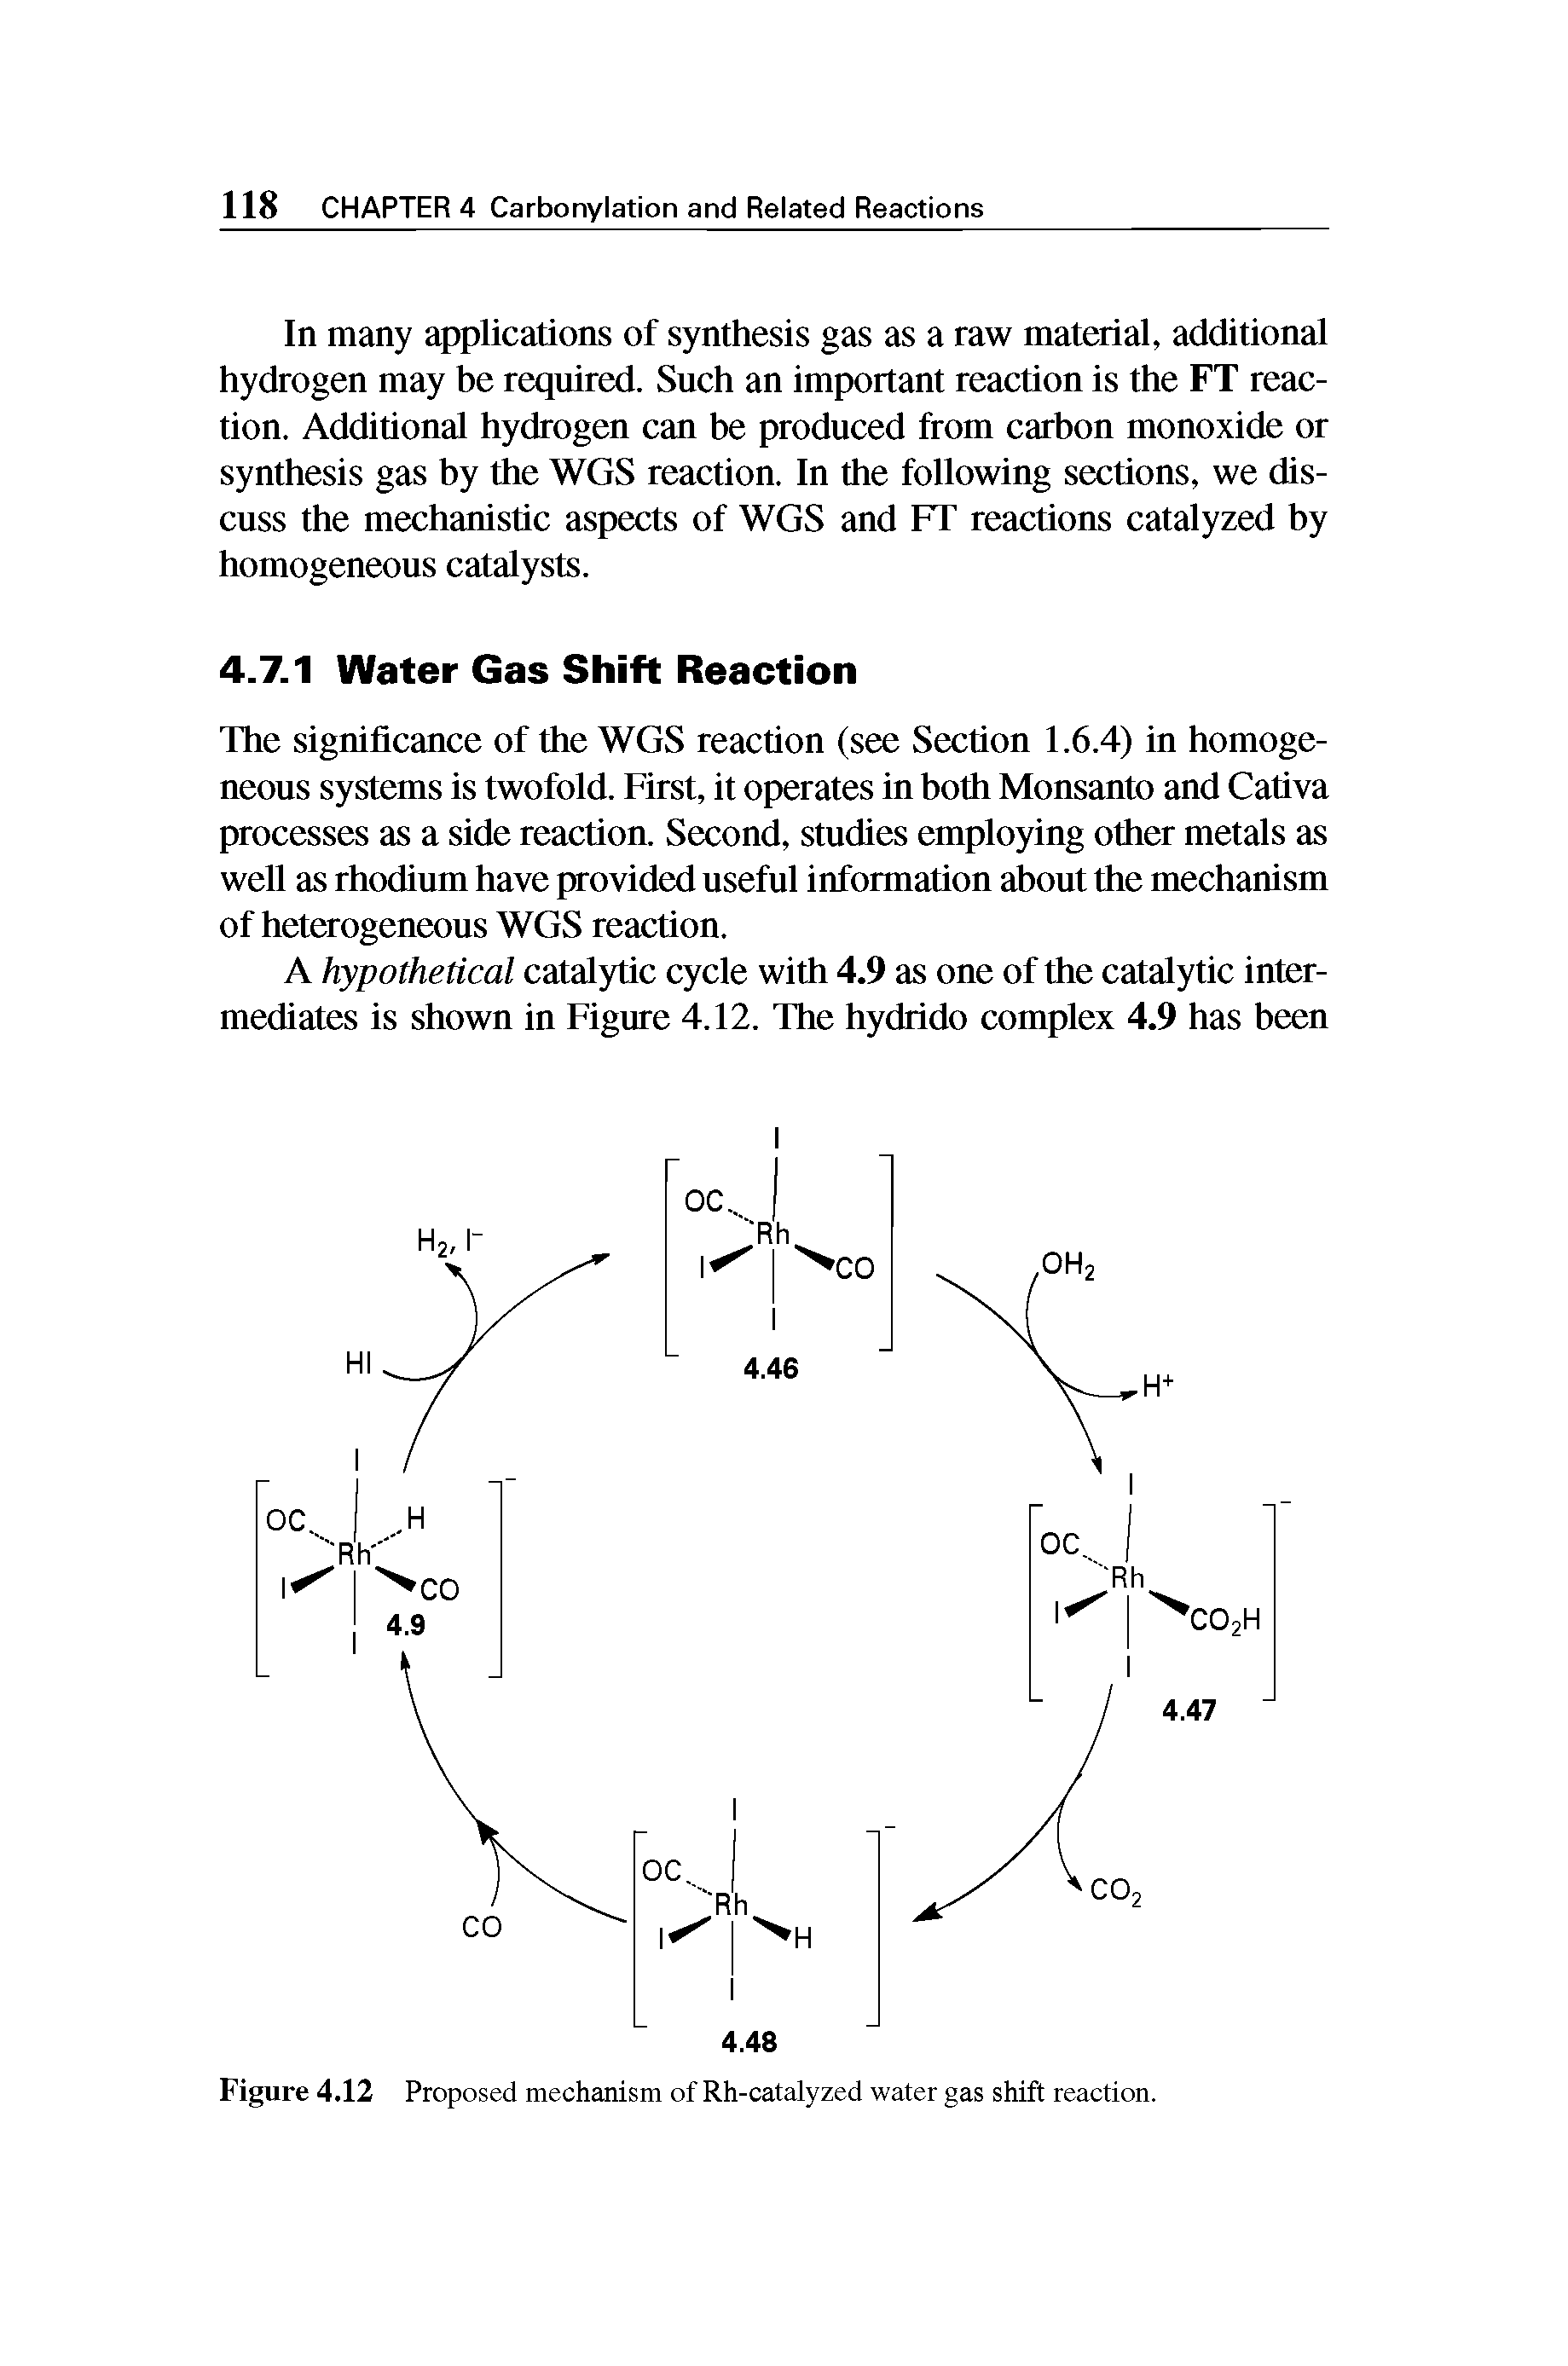 Figure 4.12 Proposed mechanism of Rh-catalyzed water gas shift reaction.